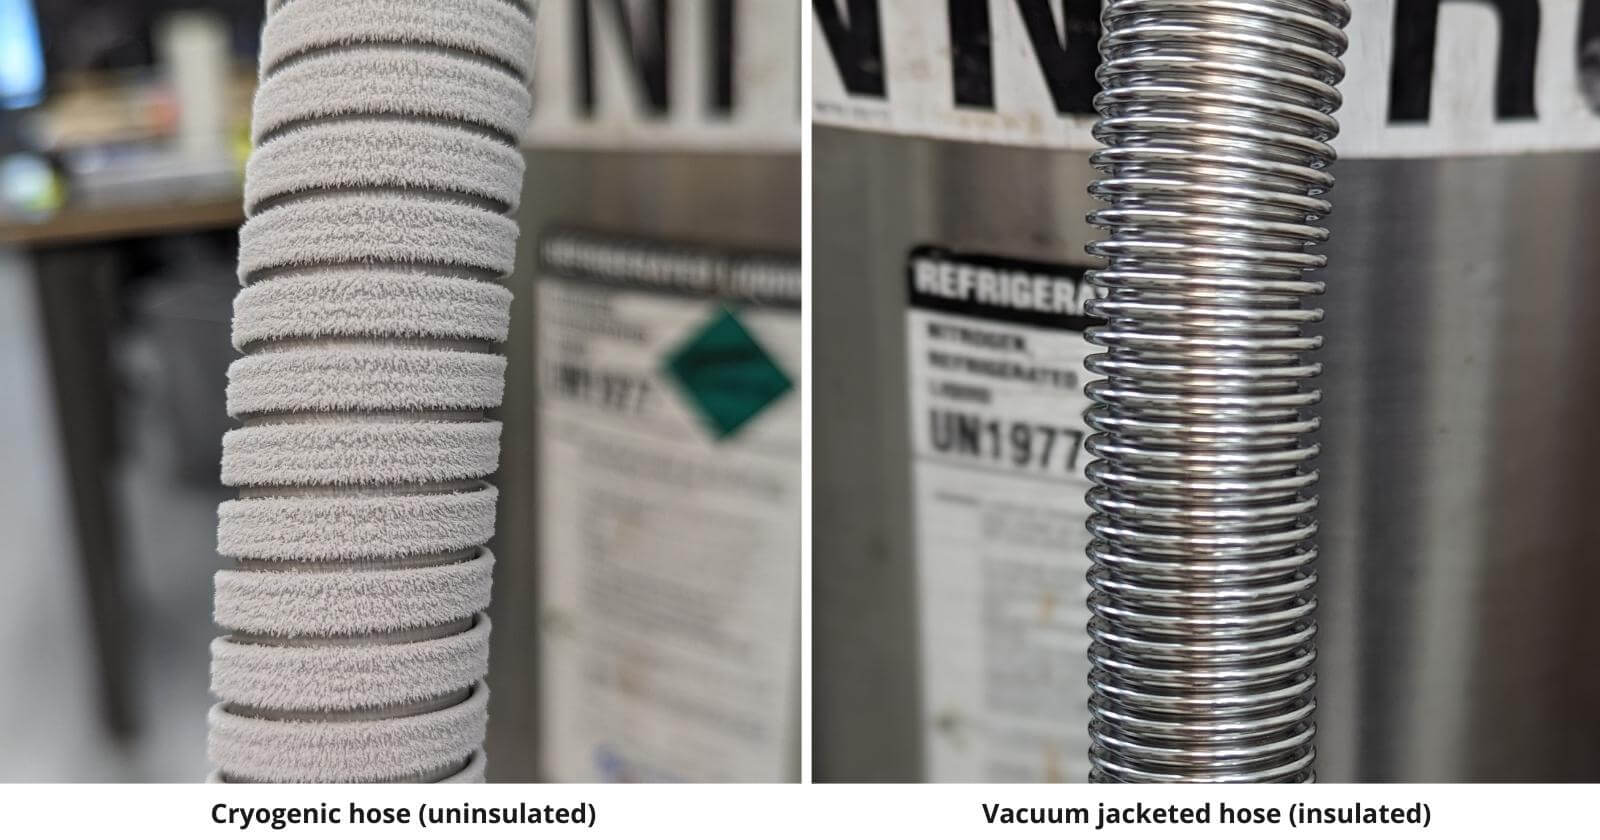 What’s the difference between cryogenic hoses and vacuum jacketed hoses?